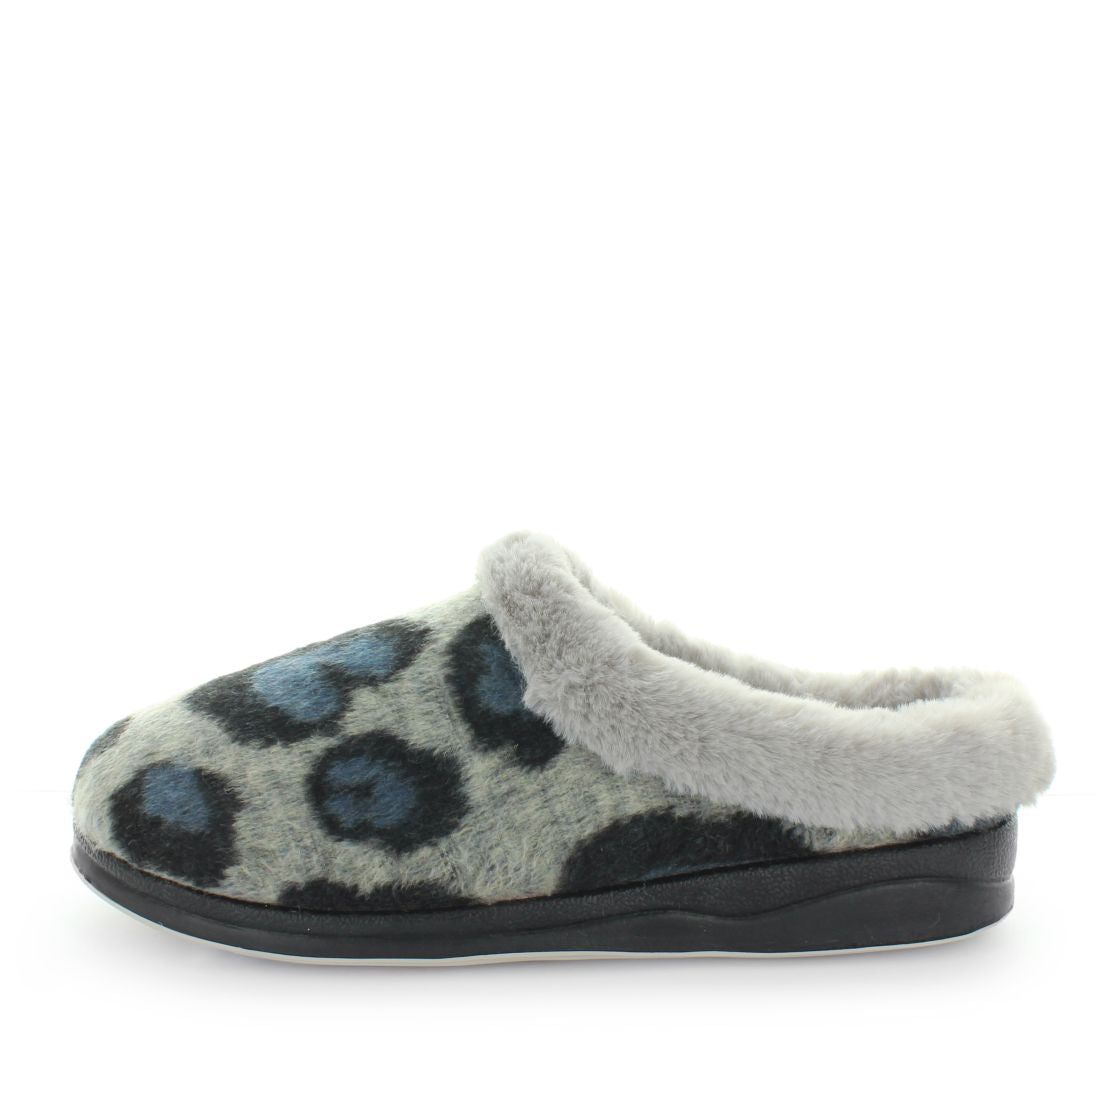 womens slippers - camel Endy slipper, by panda Slippers. A scuff style slipper with a micro-terry design for warmth and an extra comfy fit with anon slip sole - comfort womens slippers